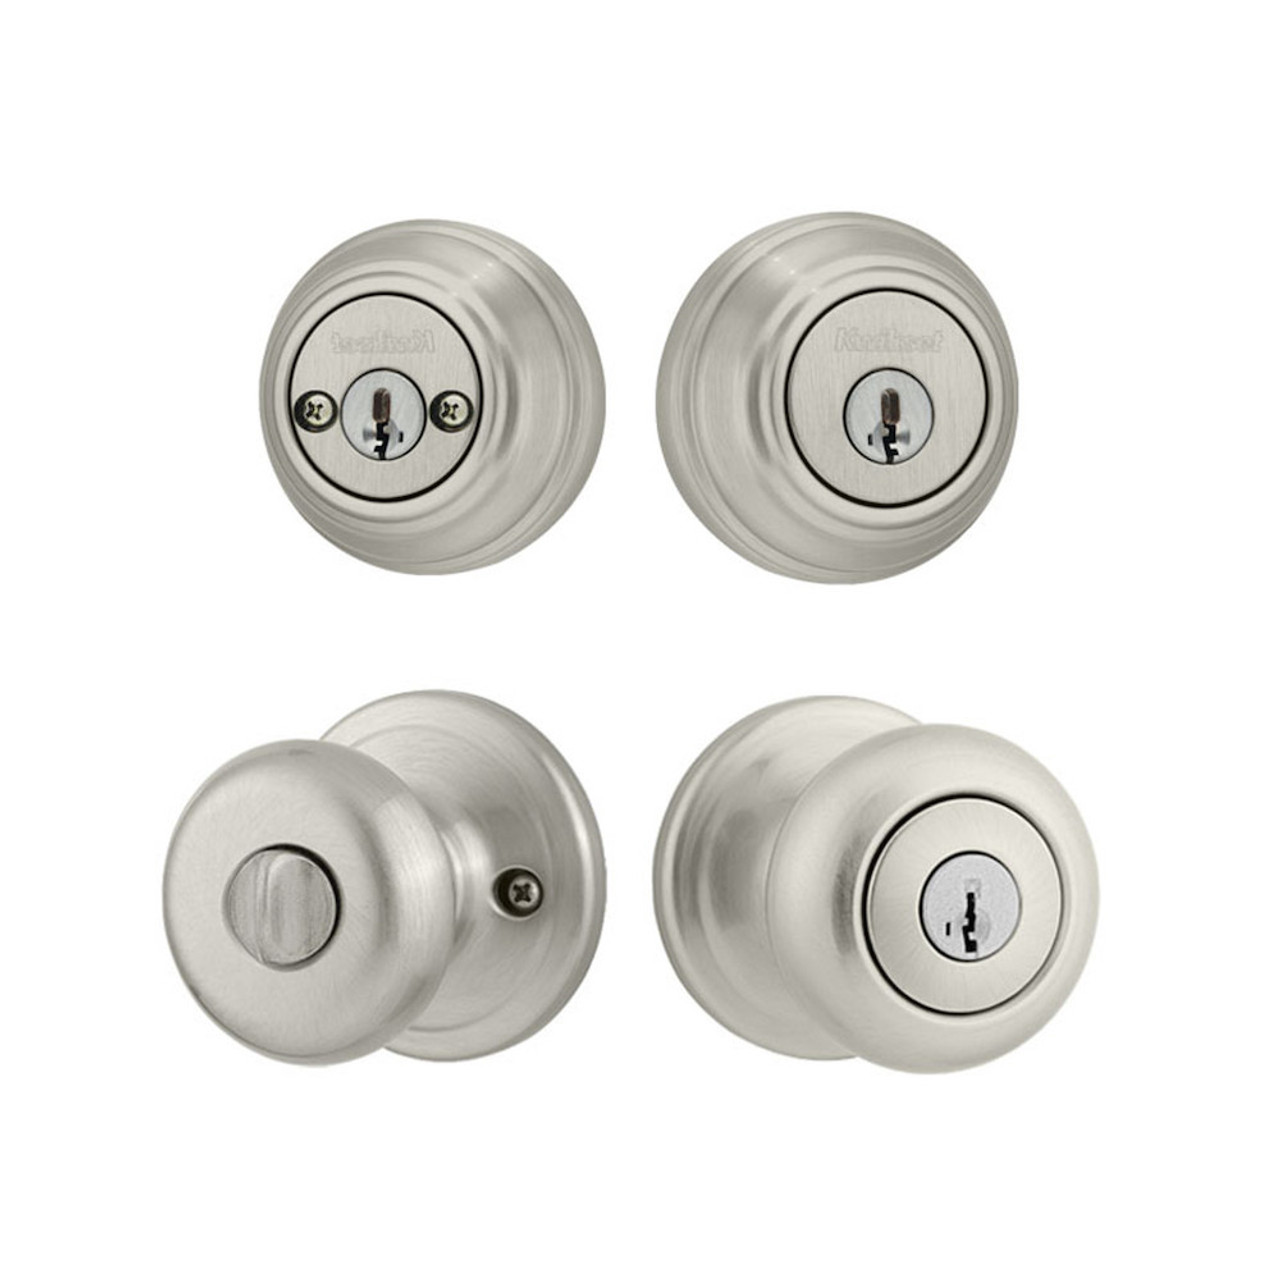 KWIKSET CP992J JUNO COMBO PACK JUNO KNOB KNOB WITH DOUBLE CYLINDER  DEADBOLT (KEYED BOTH SIDES)